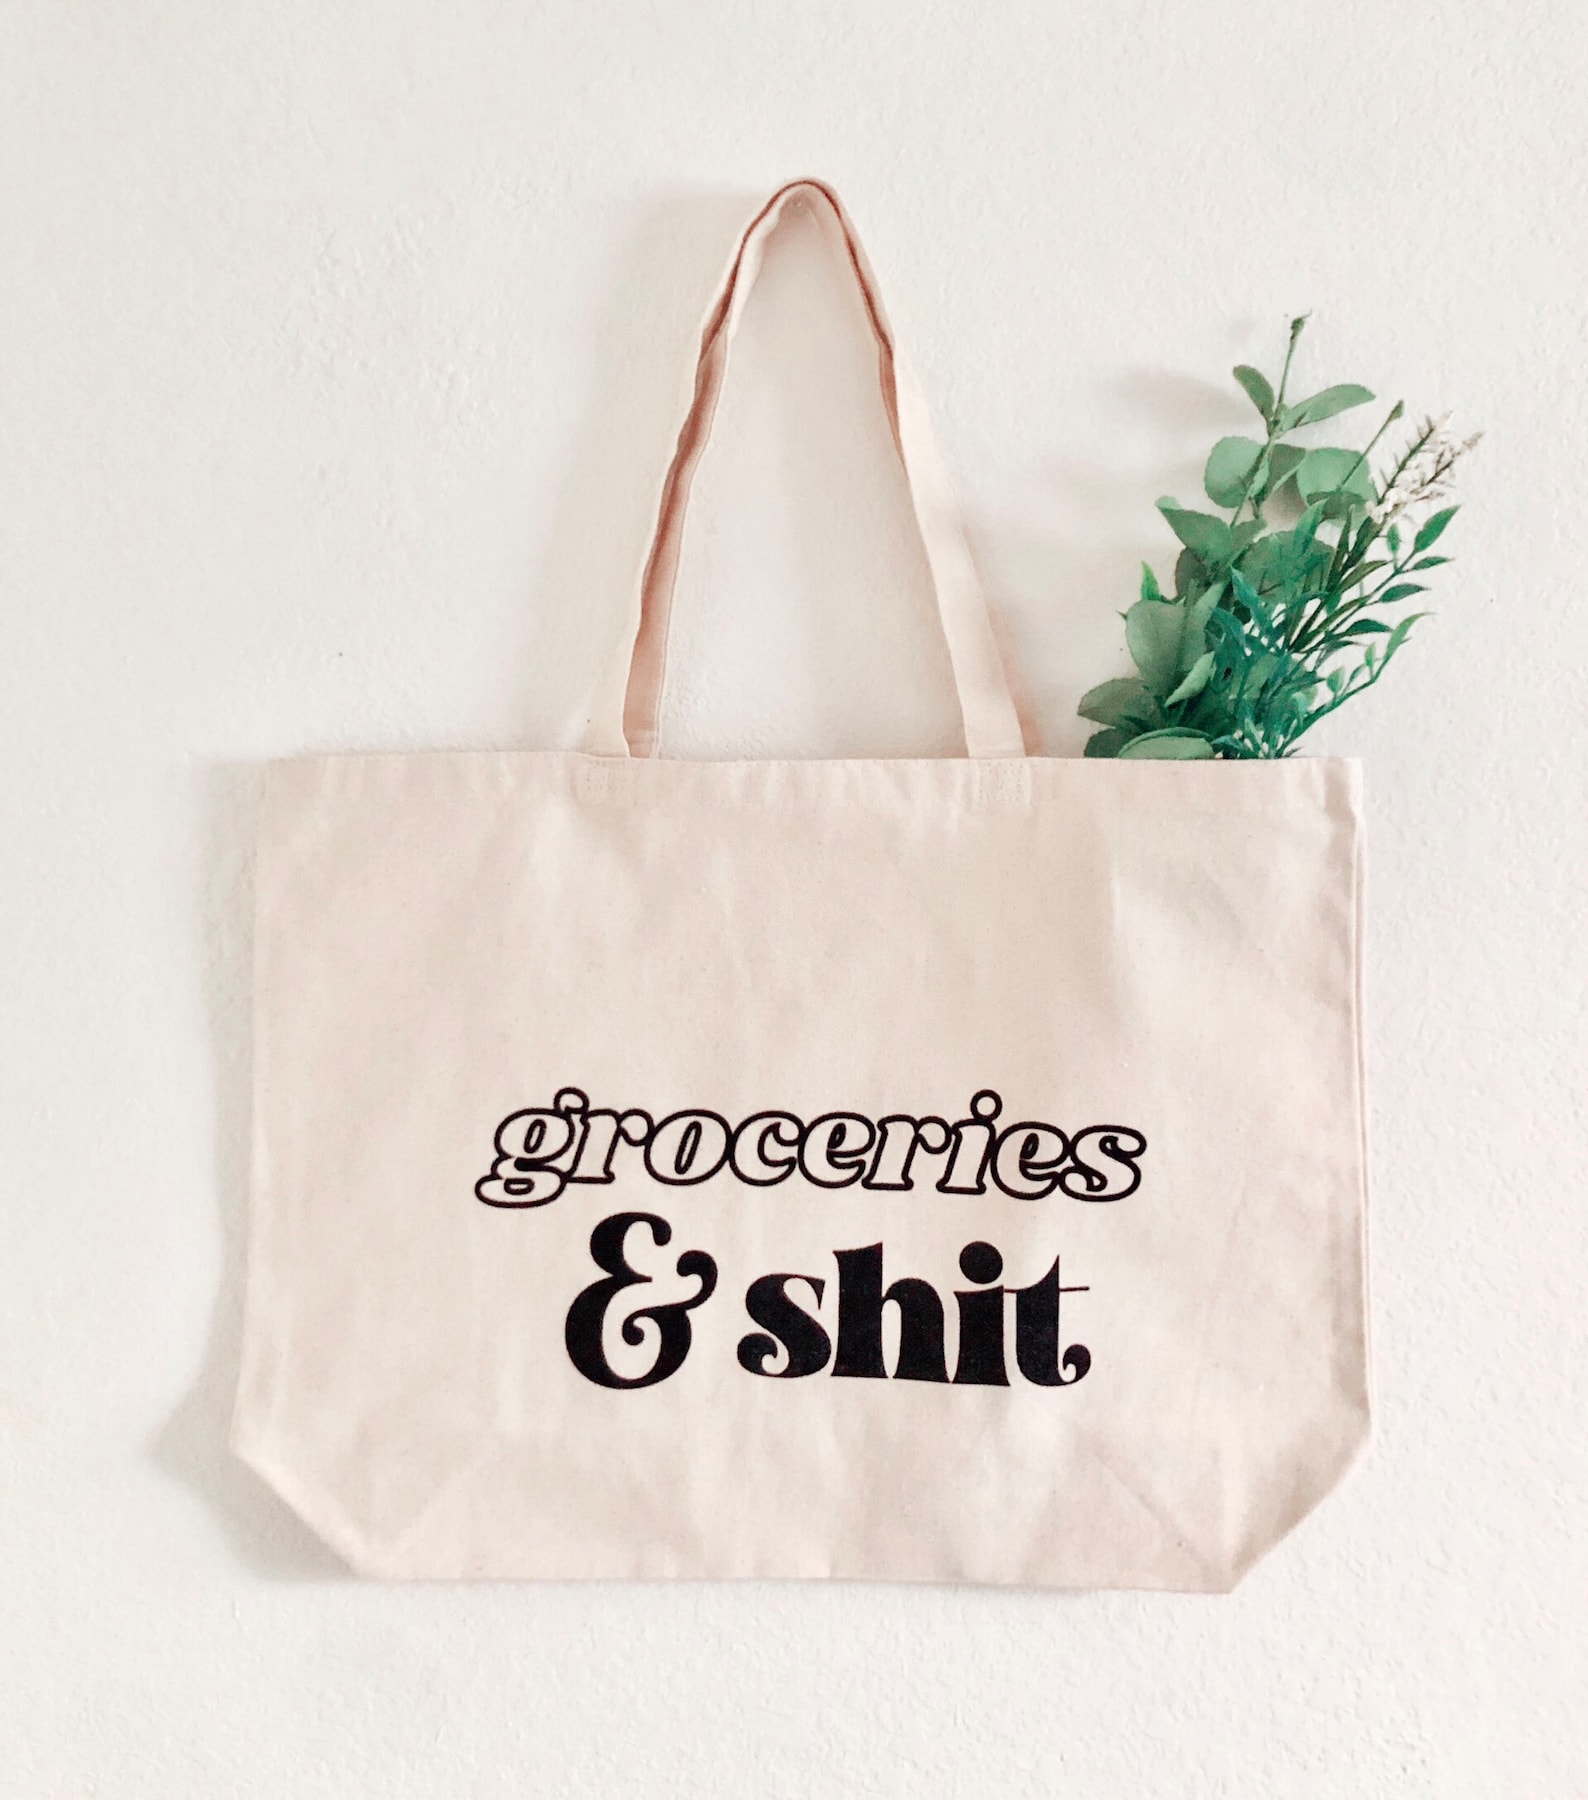 25 Hilarious Gifts For Moms Who Love To Swear - Funny Mother's Day